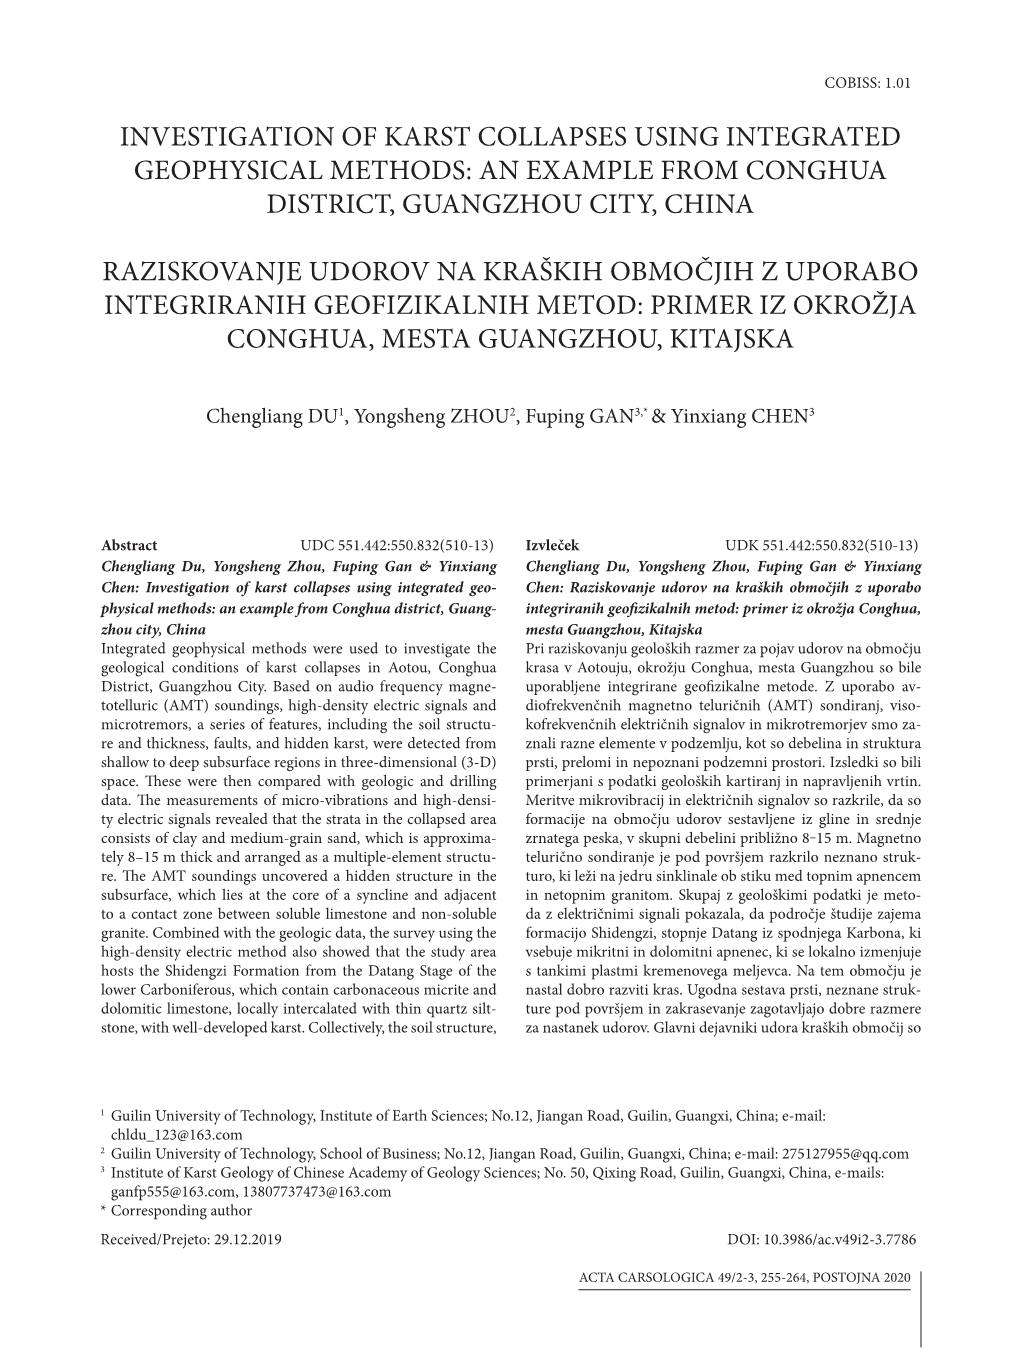 Investigation of Karst Collapses Using Integrated Geophysical Methods: an Example from Conghua District, Guangzhou City, China